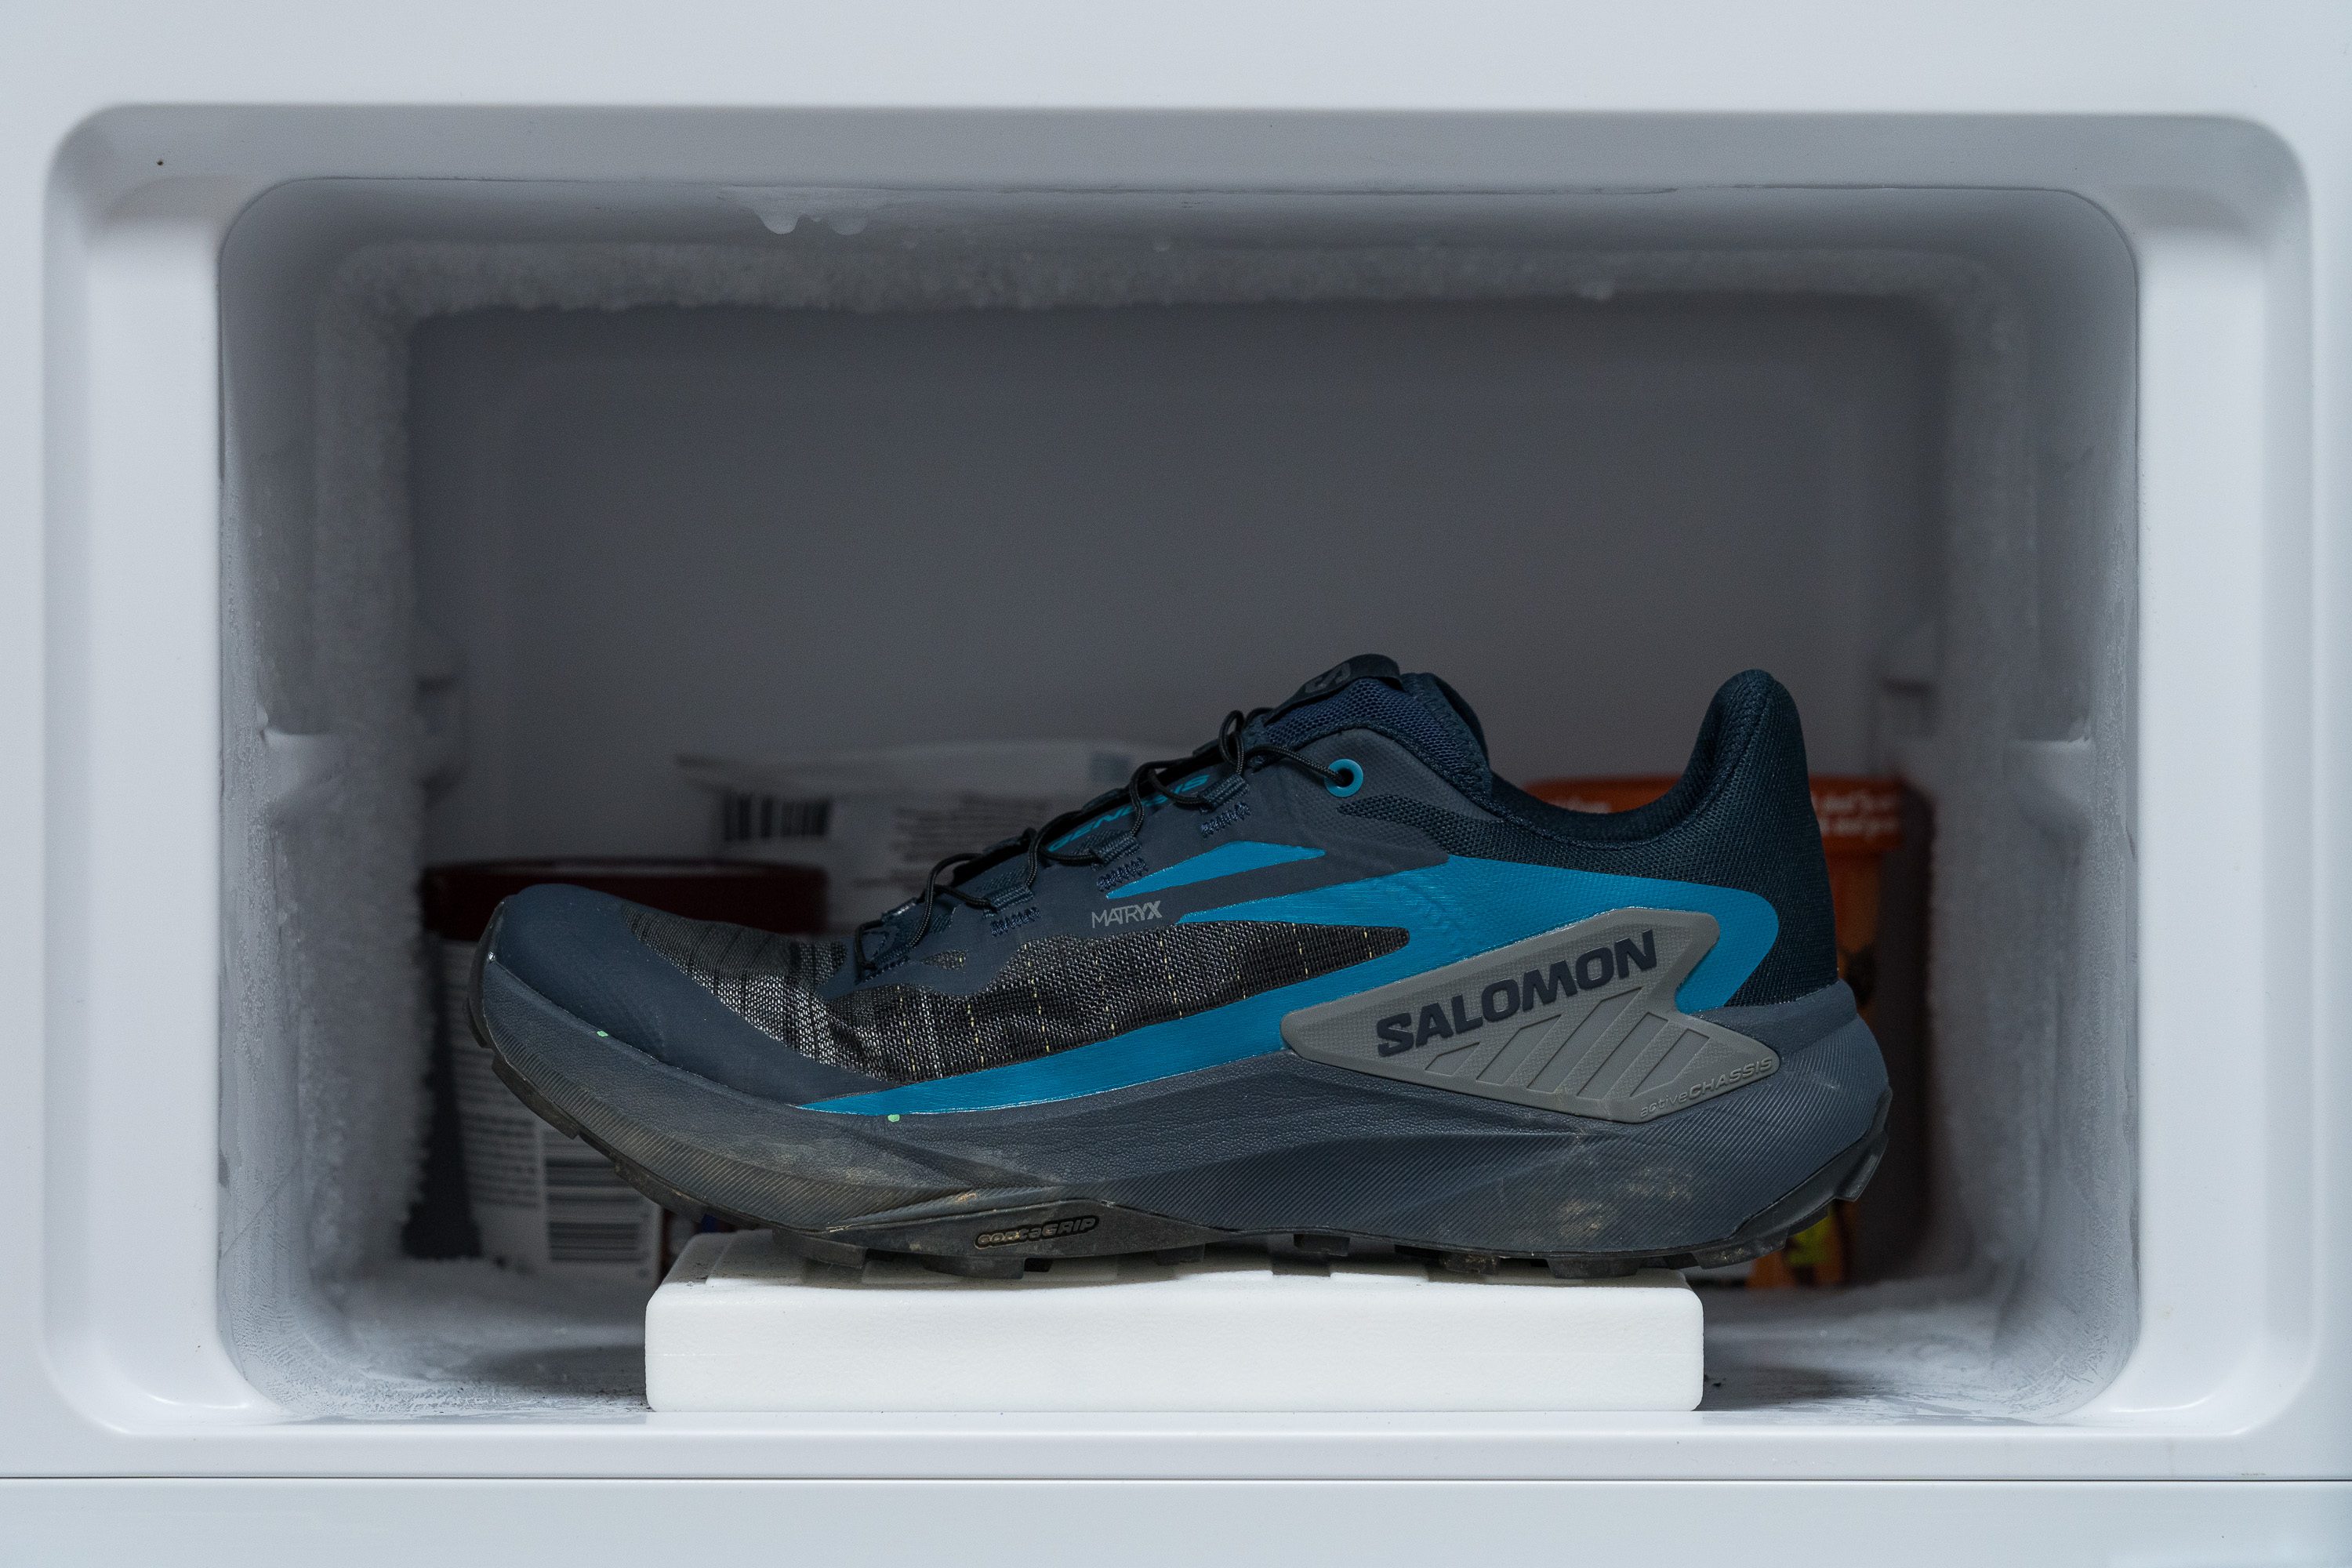 Salomon Genesis Difference in midsole softness in cold